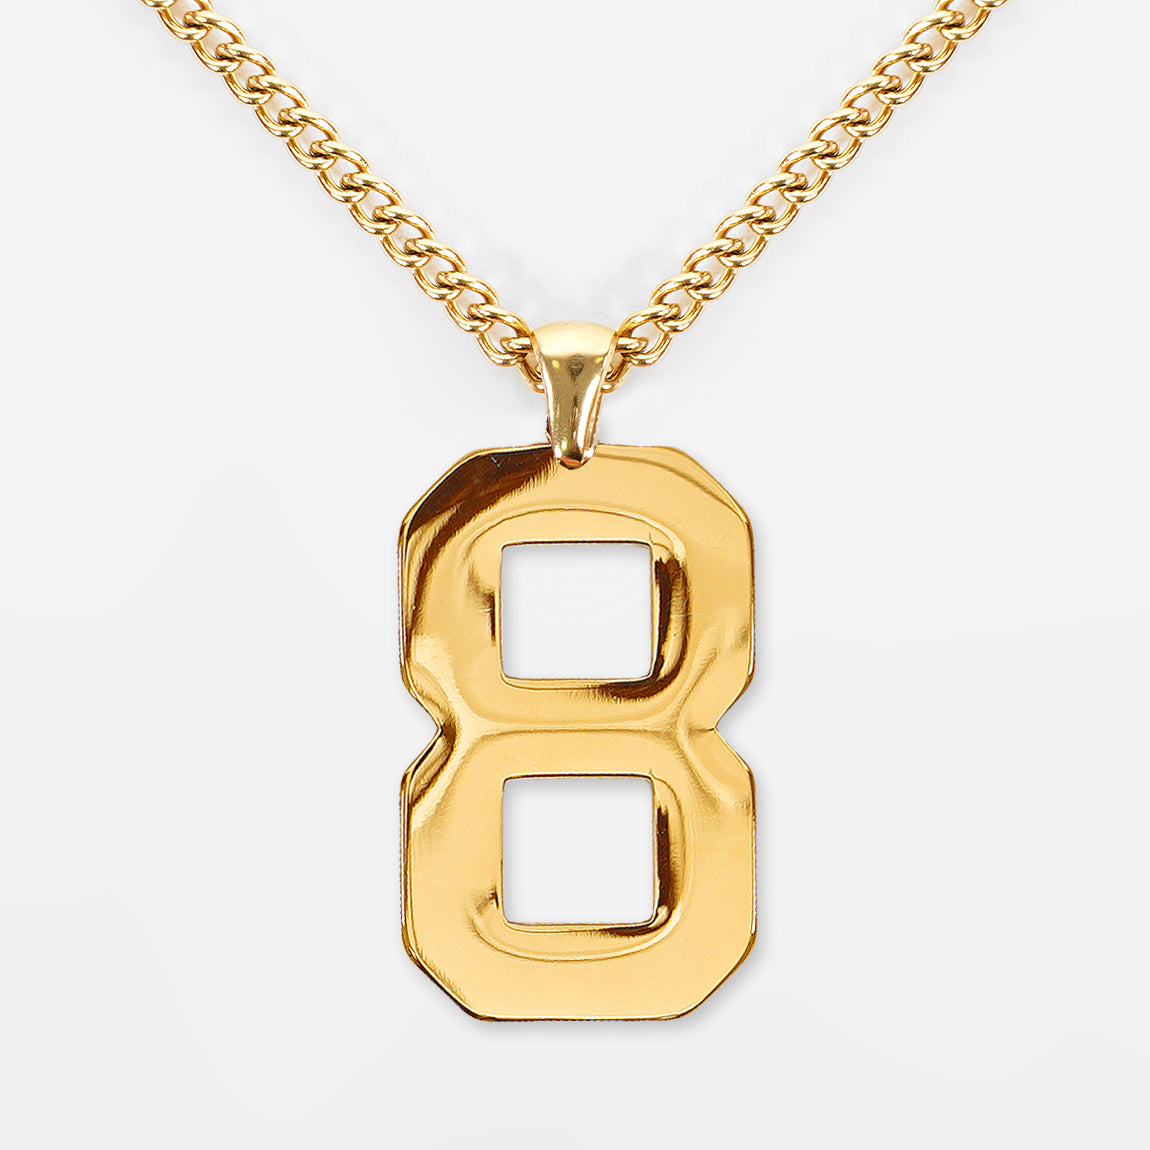 8 Number Pendant with Chain Necklace - Gold Plated Stainless Steel